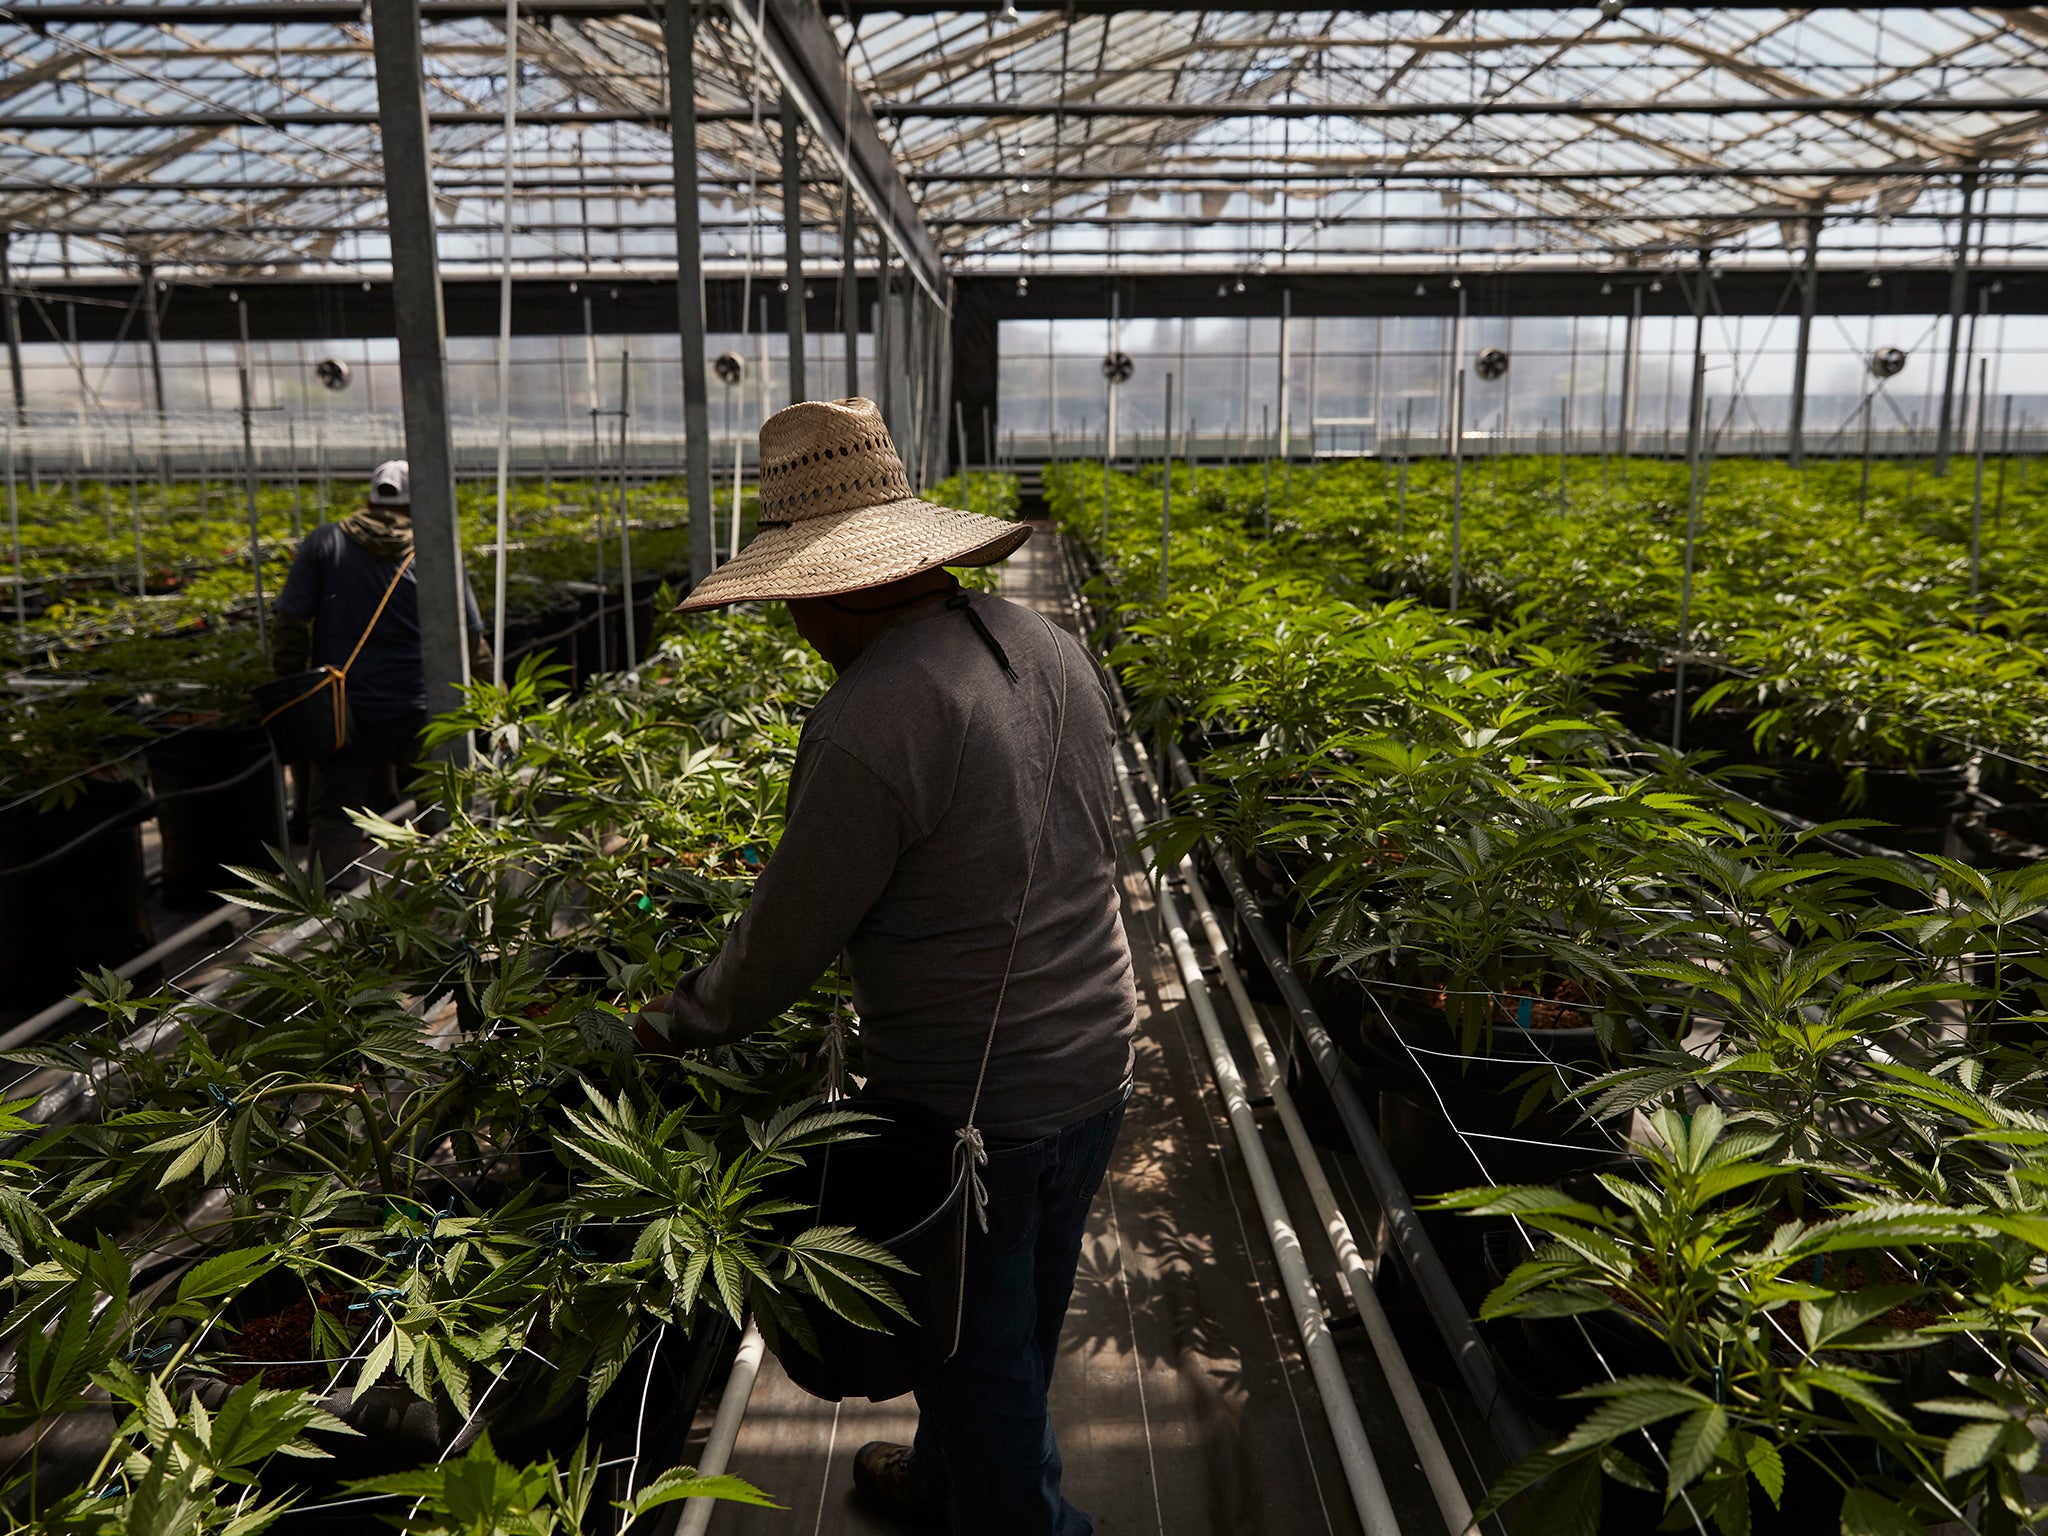 Workers in a greenhouse growing cannabis plants in California